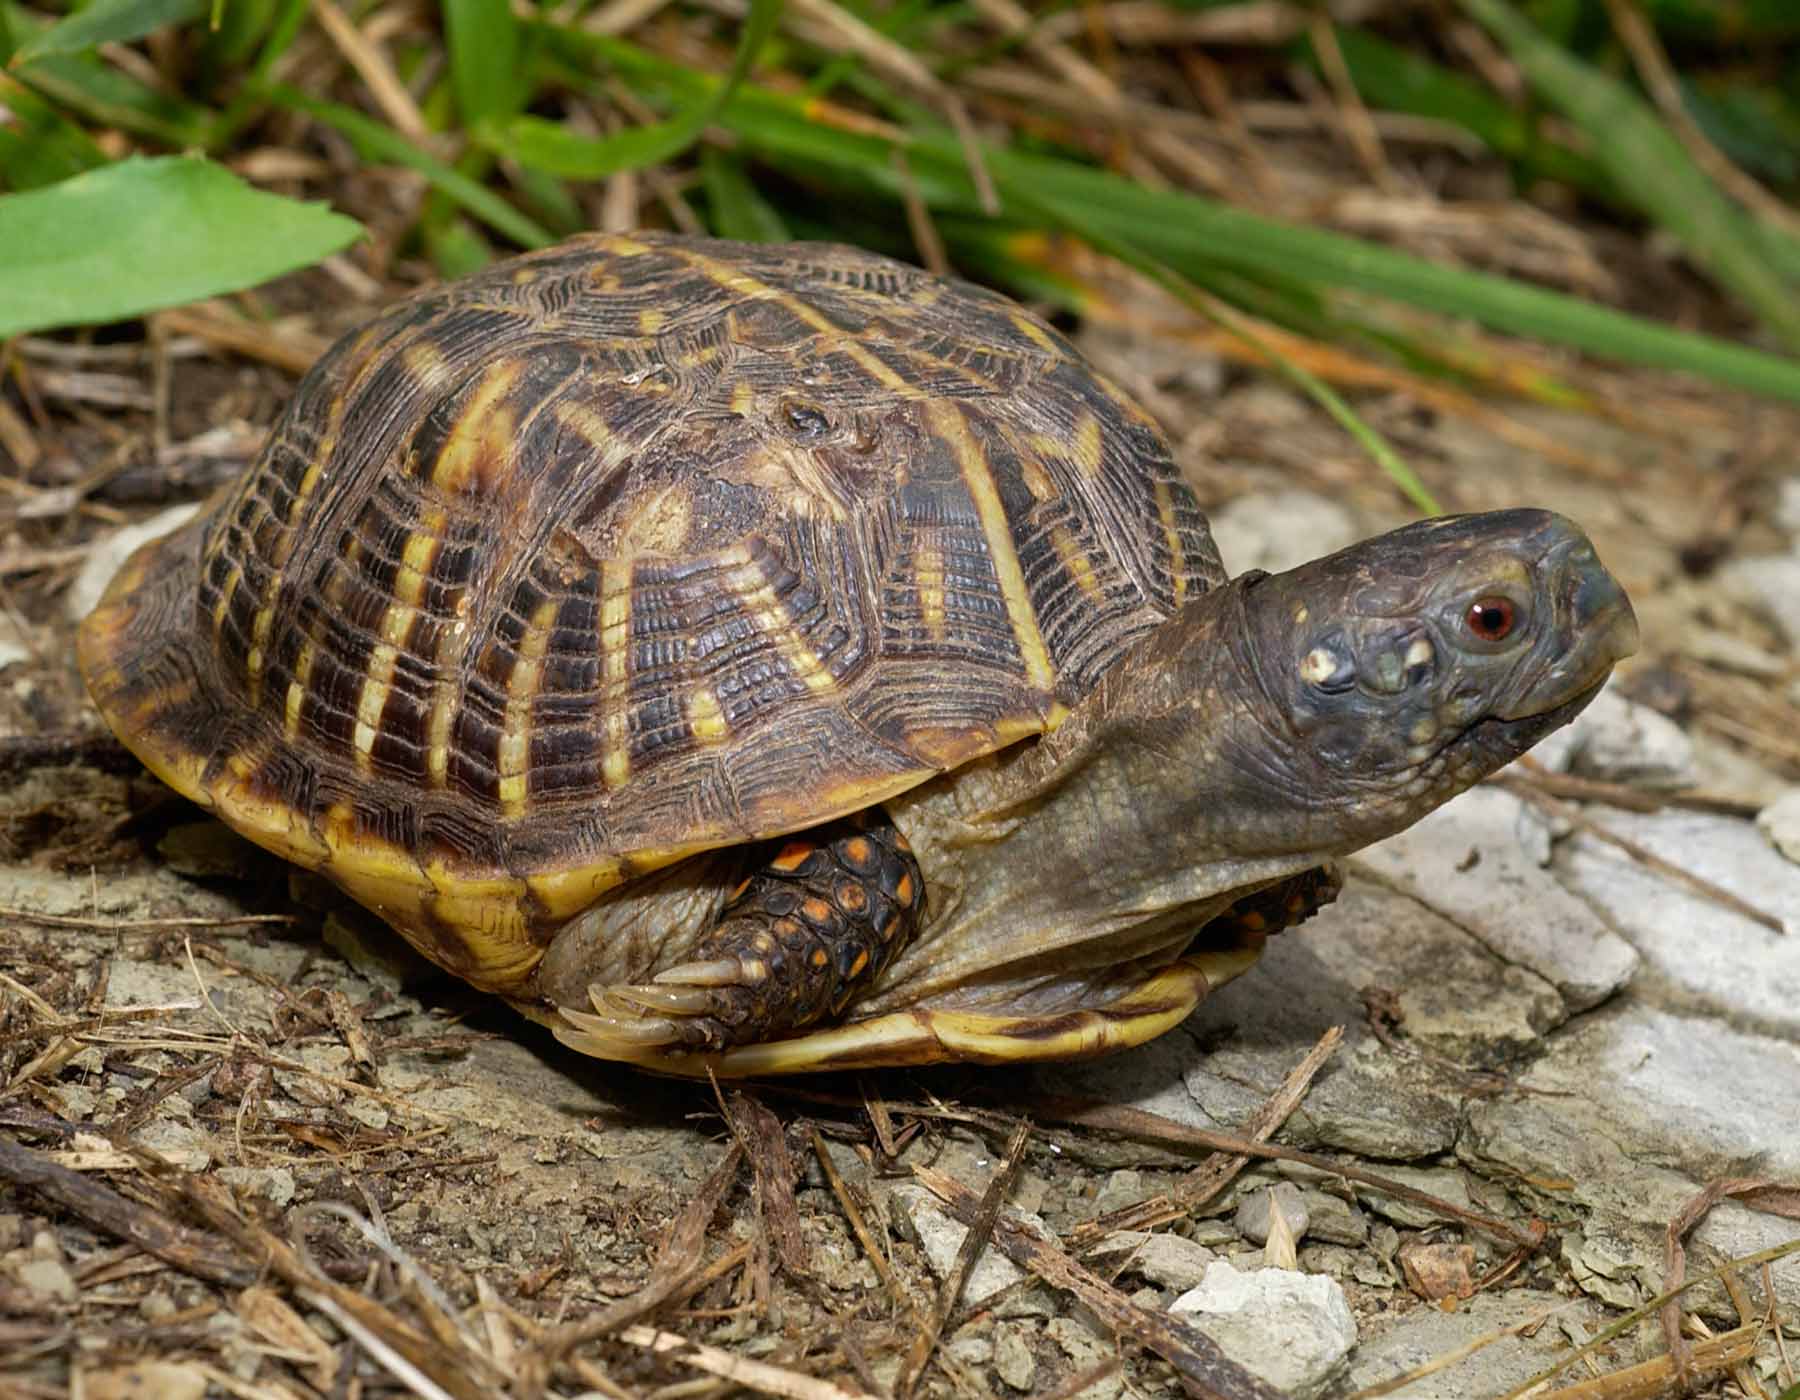 Photo of an ornate box turtle with its arms drawn in.